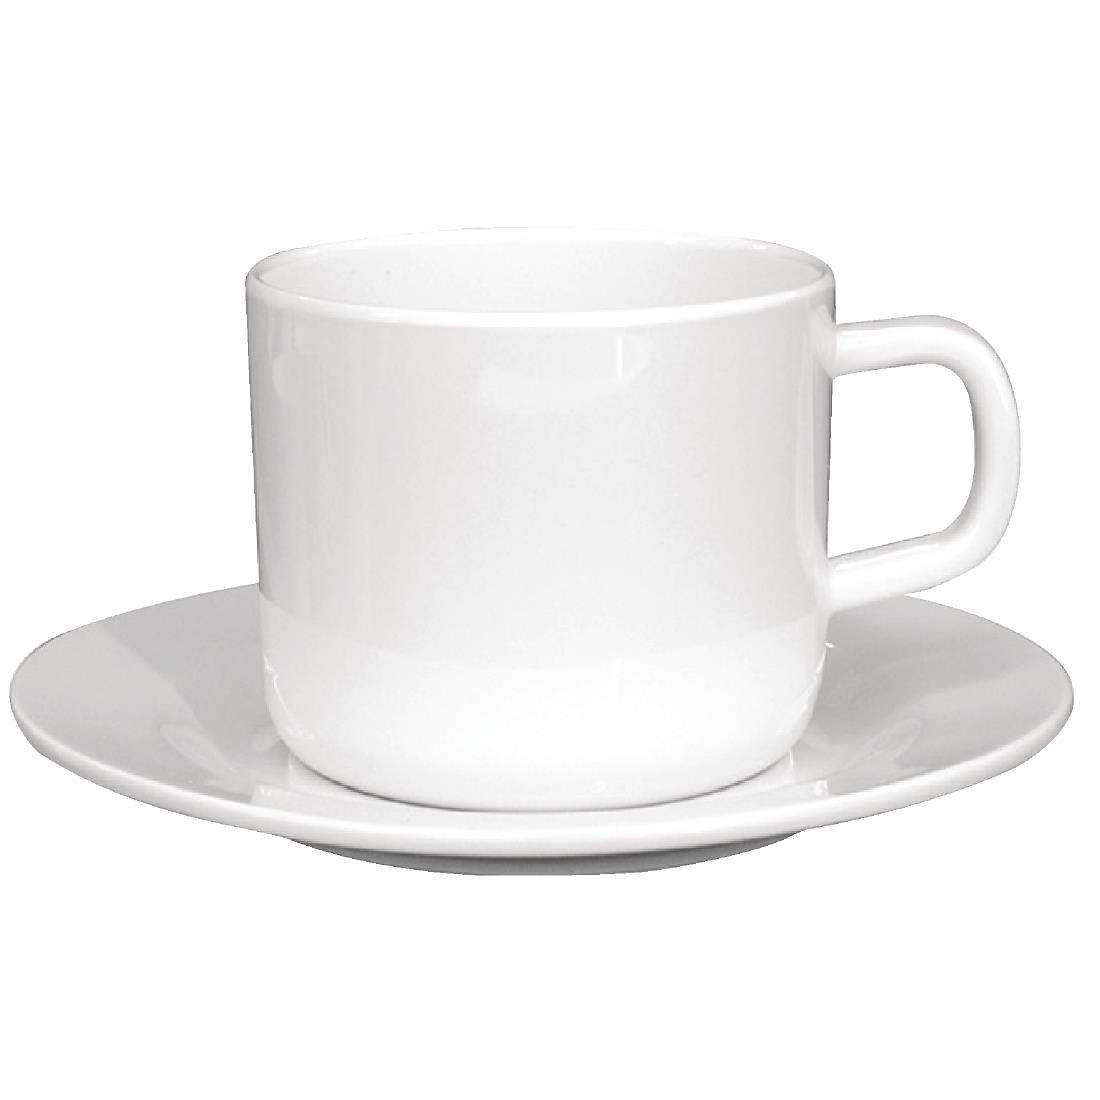 Olympia Kristallon Melamine Saucers 140mm (Pack of 12) - W237  - 1